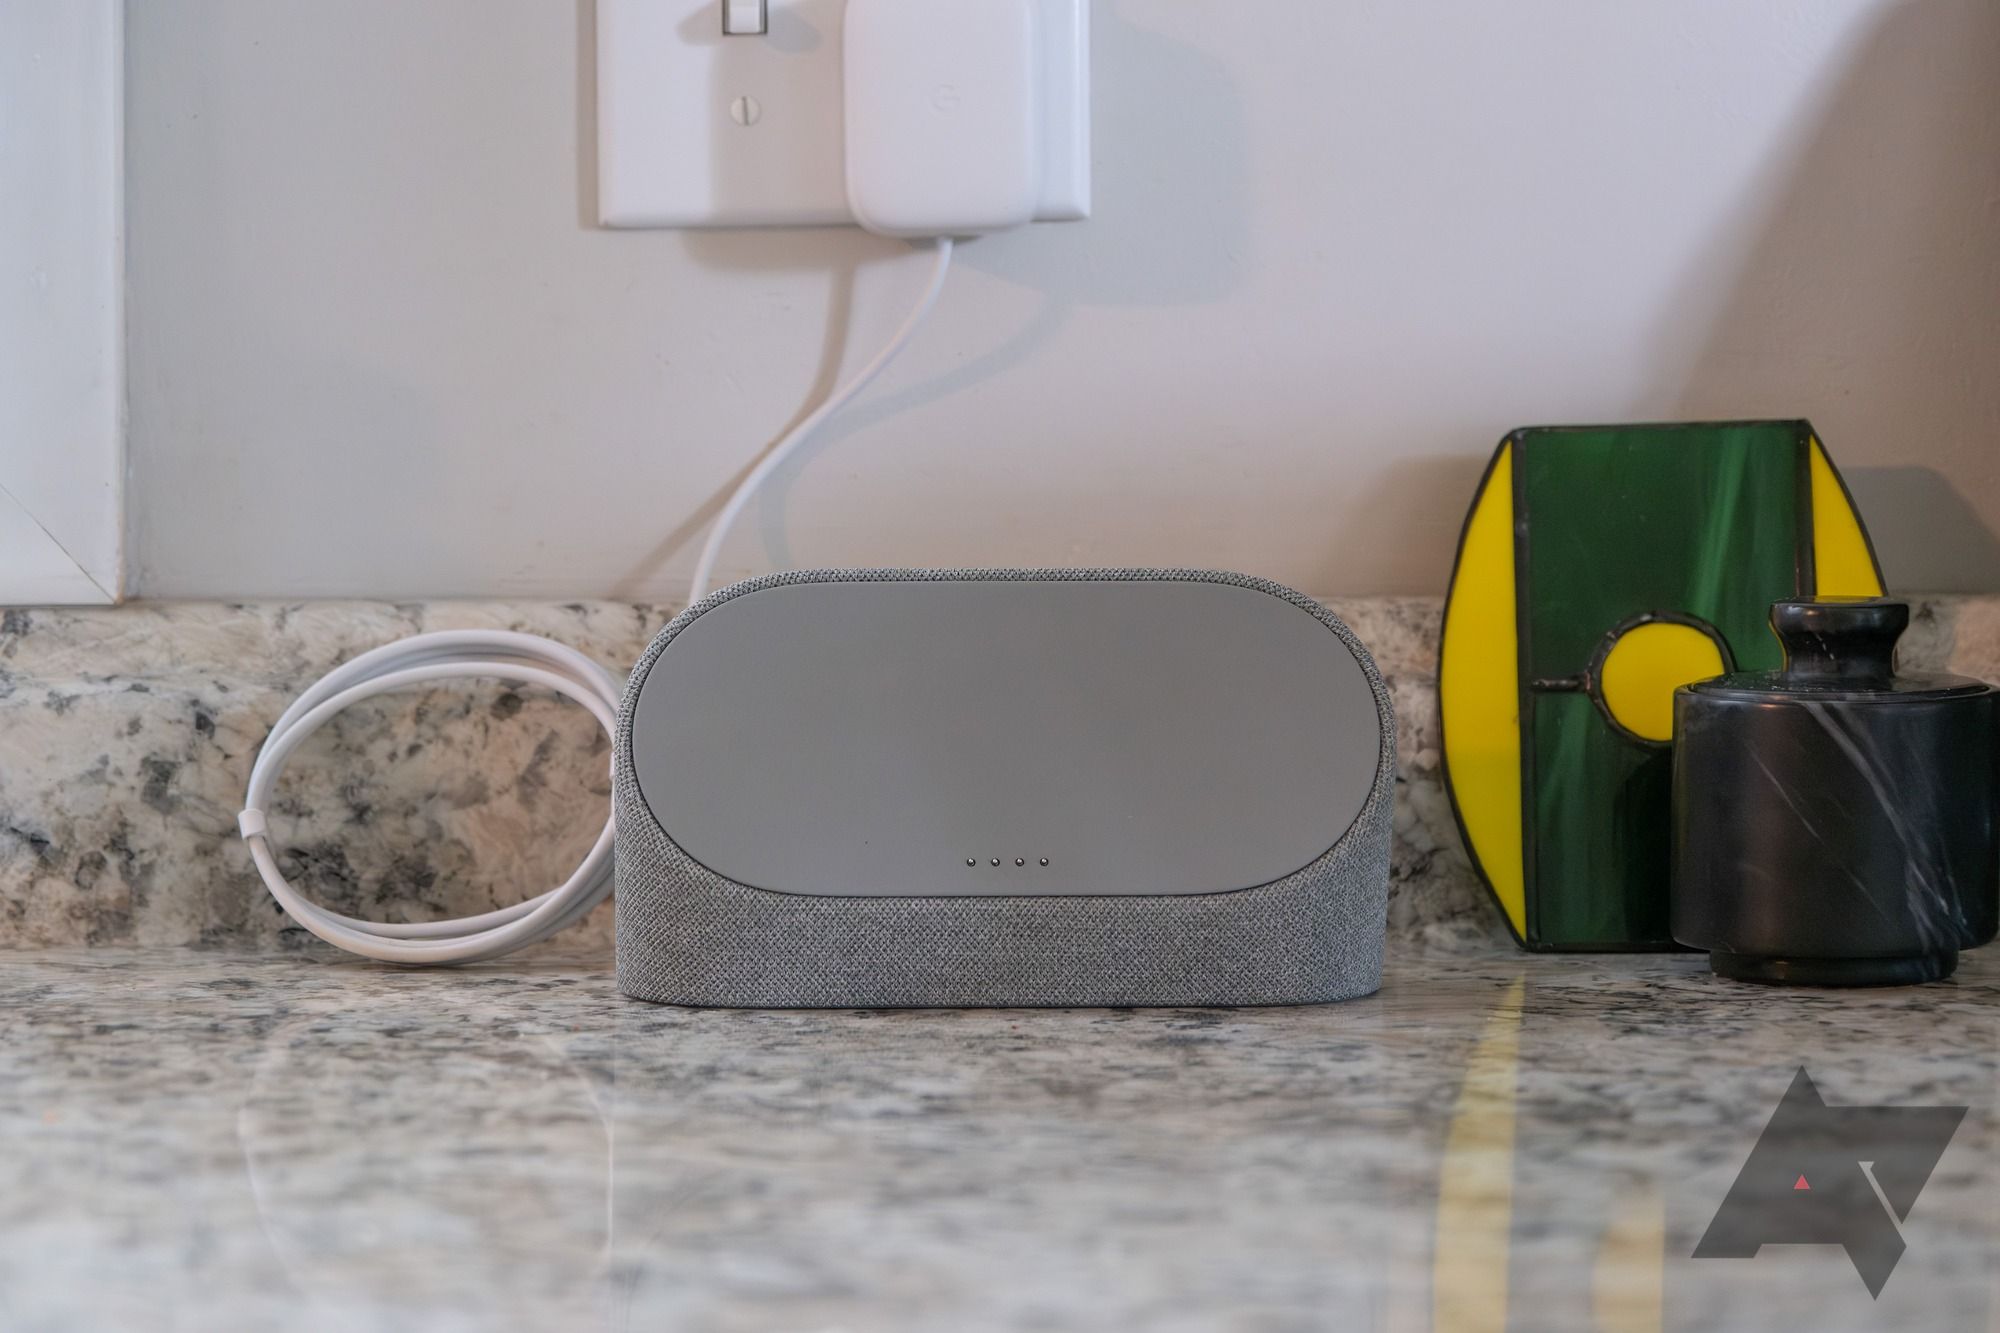 The Pixel Tablet's Charging Speaker Dock on a kitchen counter